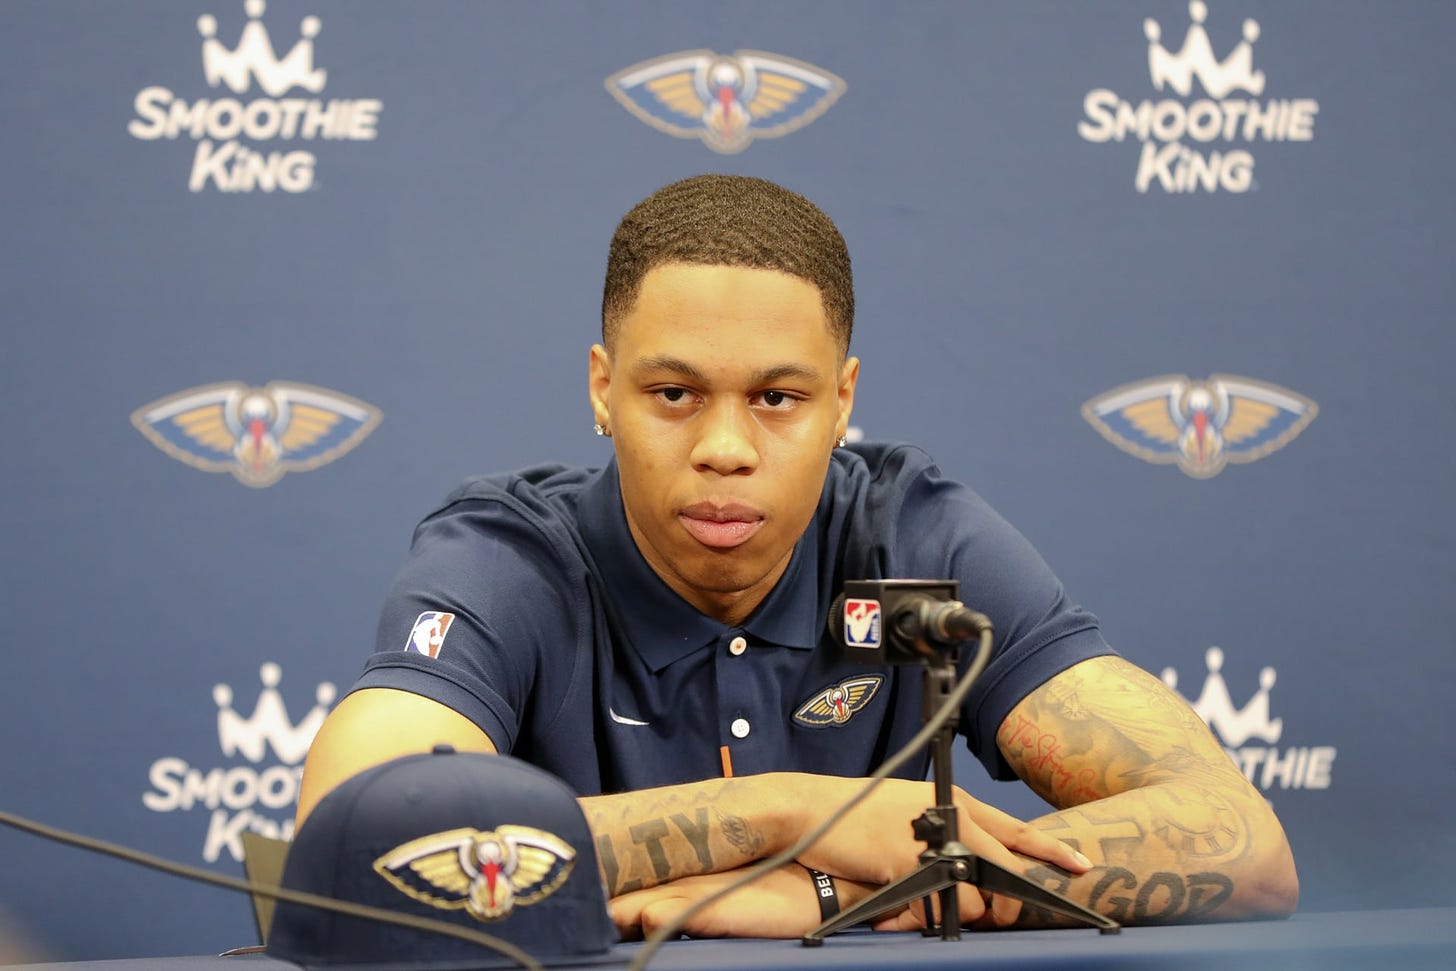 Slideshow-image: New Orleans Pelicans 2023 draft pick Jordan Hawkins attended his introductory press conference with General Manager Trajan Langdon and greeted team...